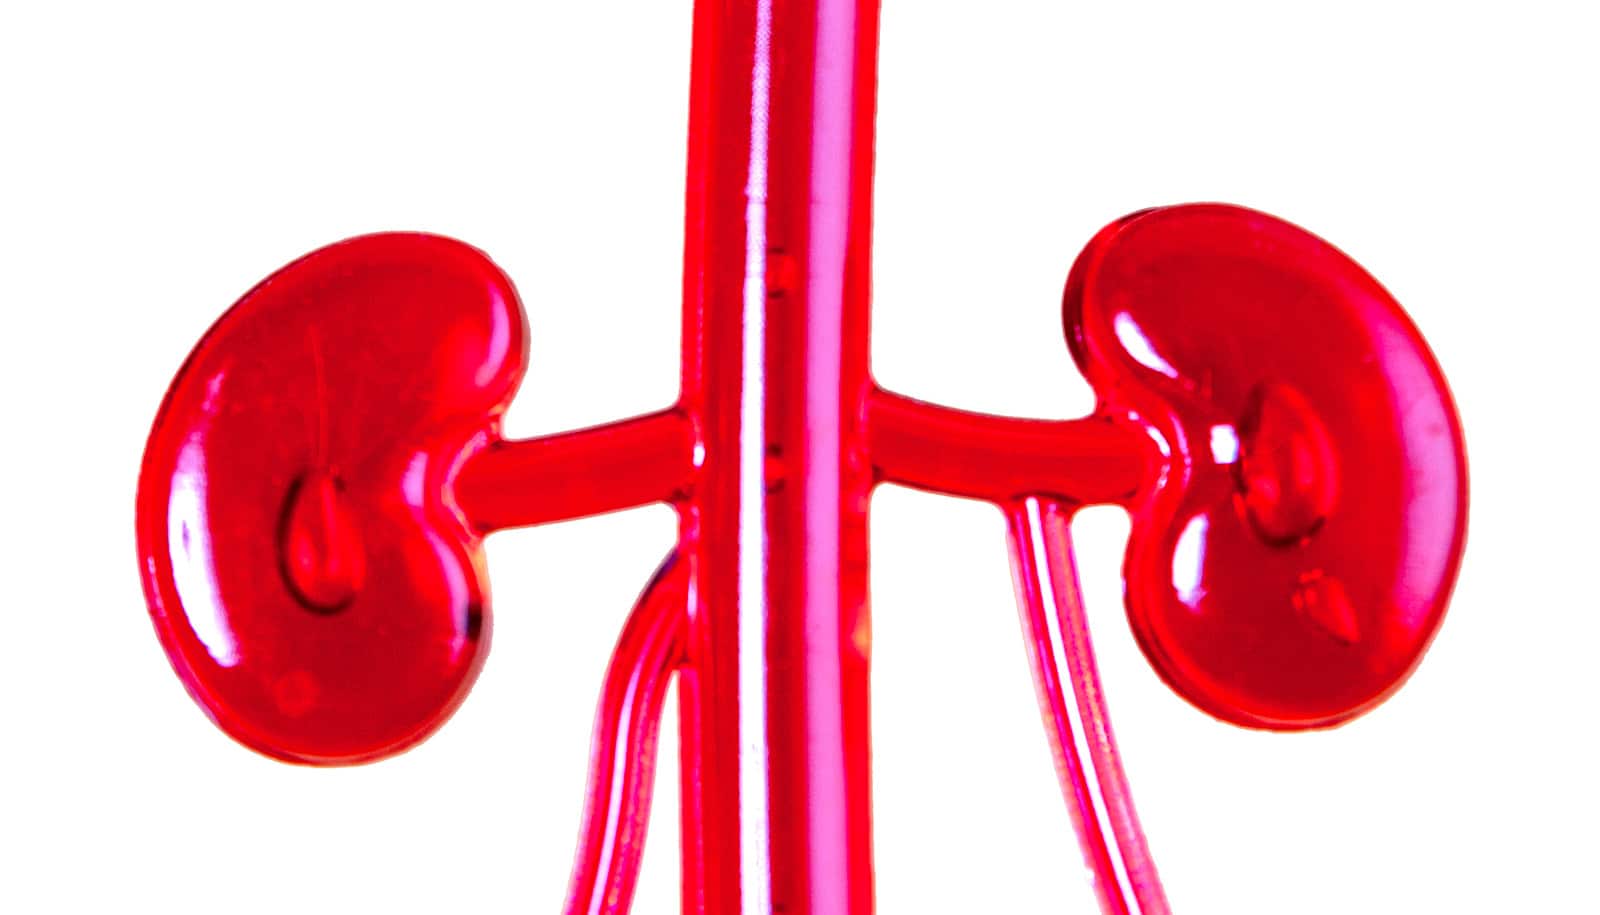 A pink plastic model of two kidneys on a white background.